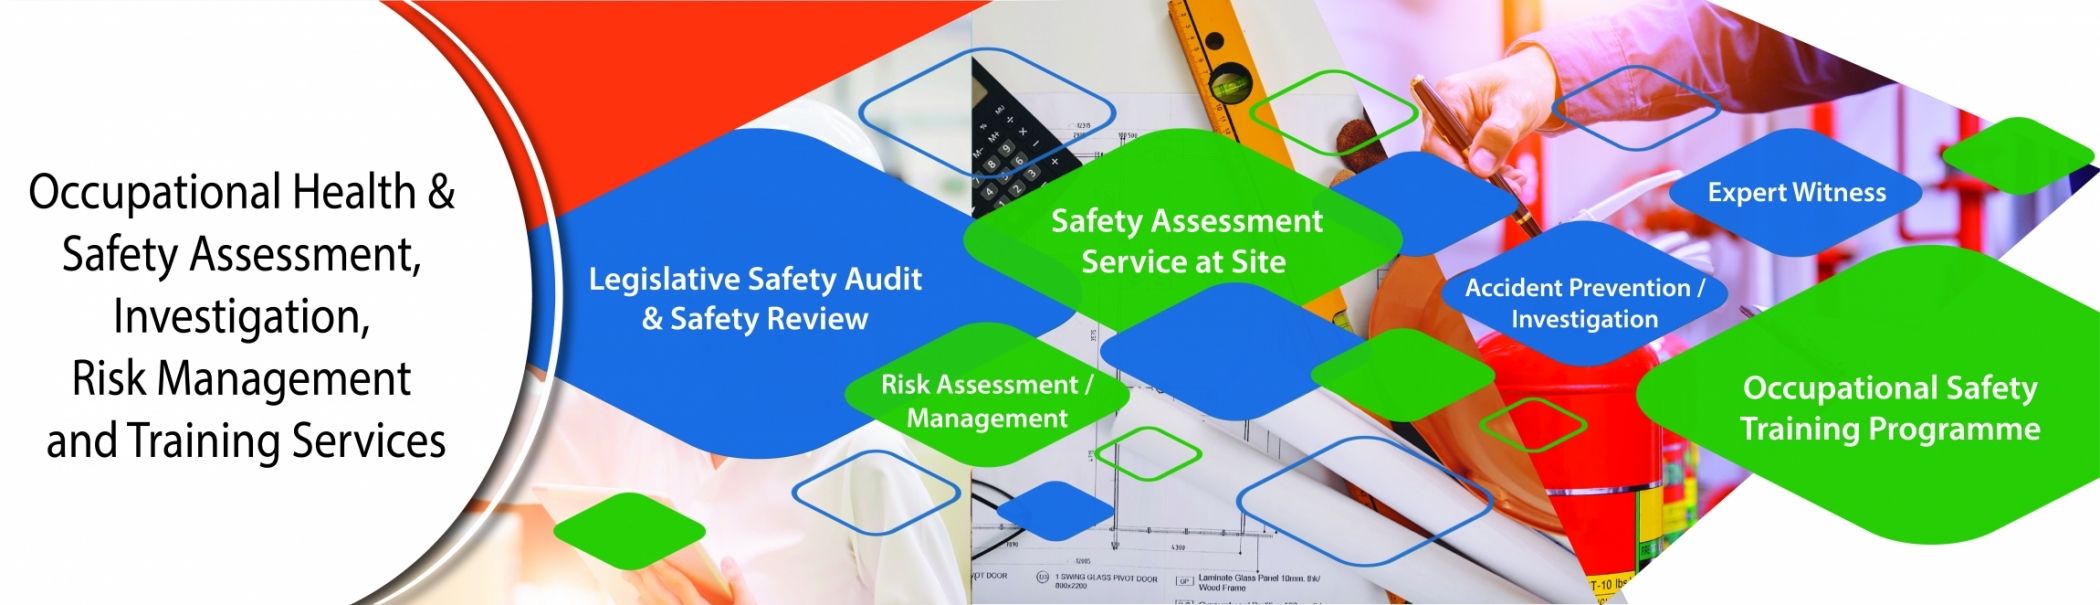 Occupational Health & Safety Assessment, Investigation, Risk Management and Training Services-01